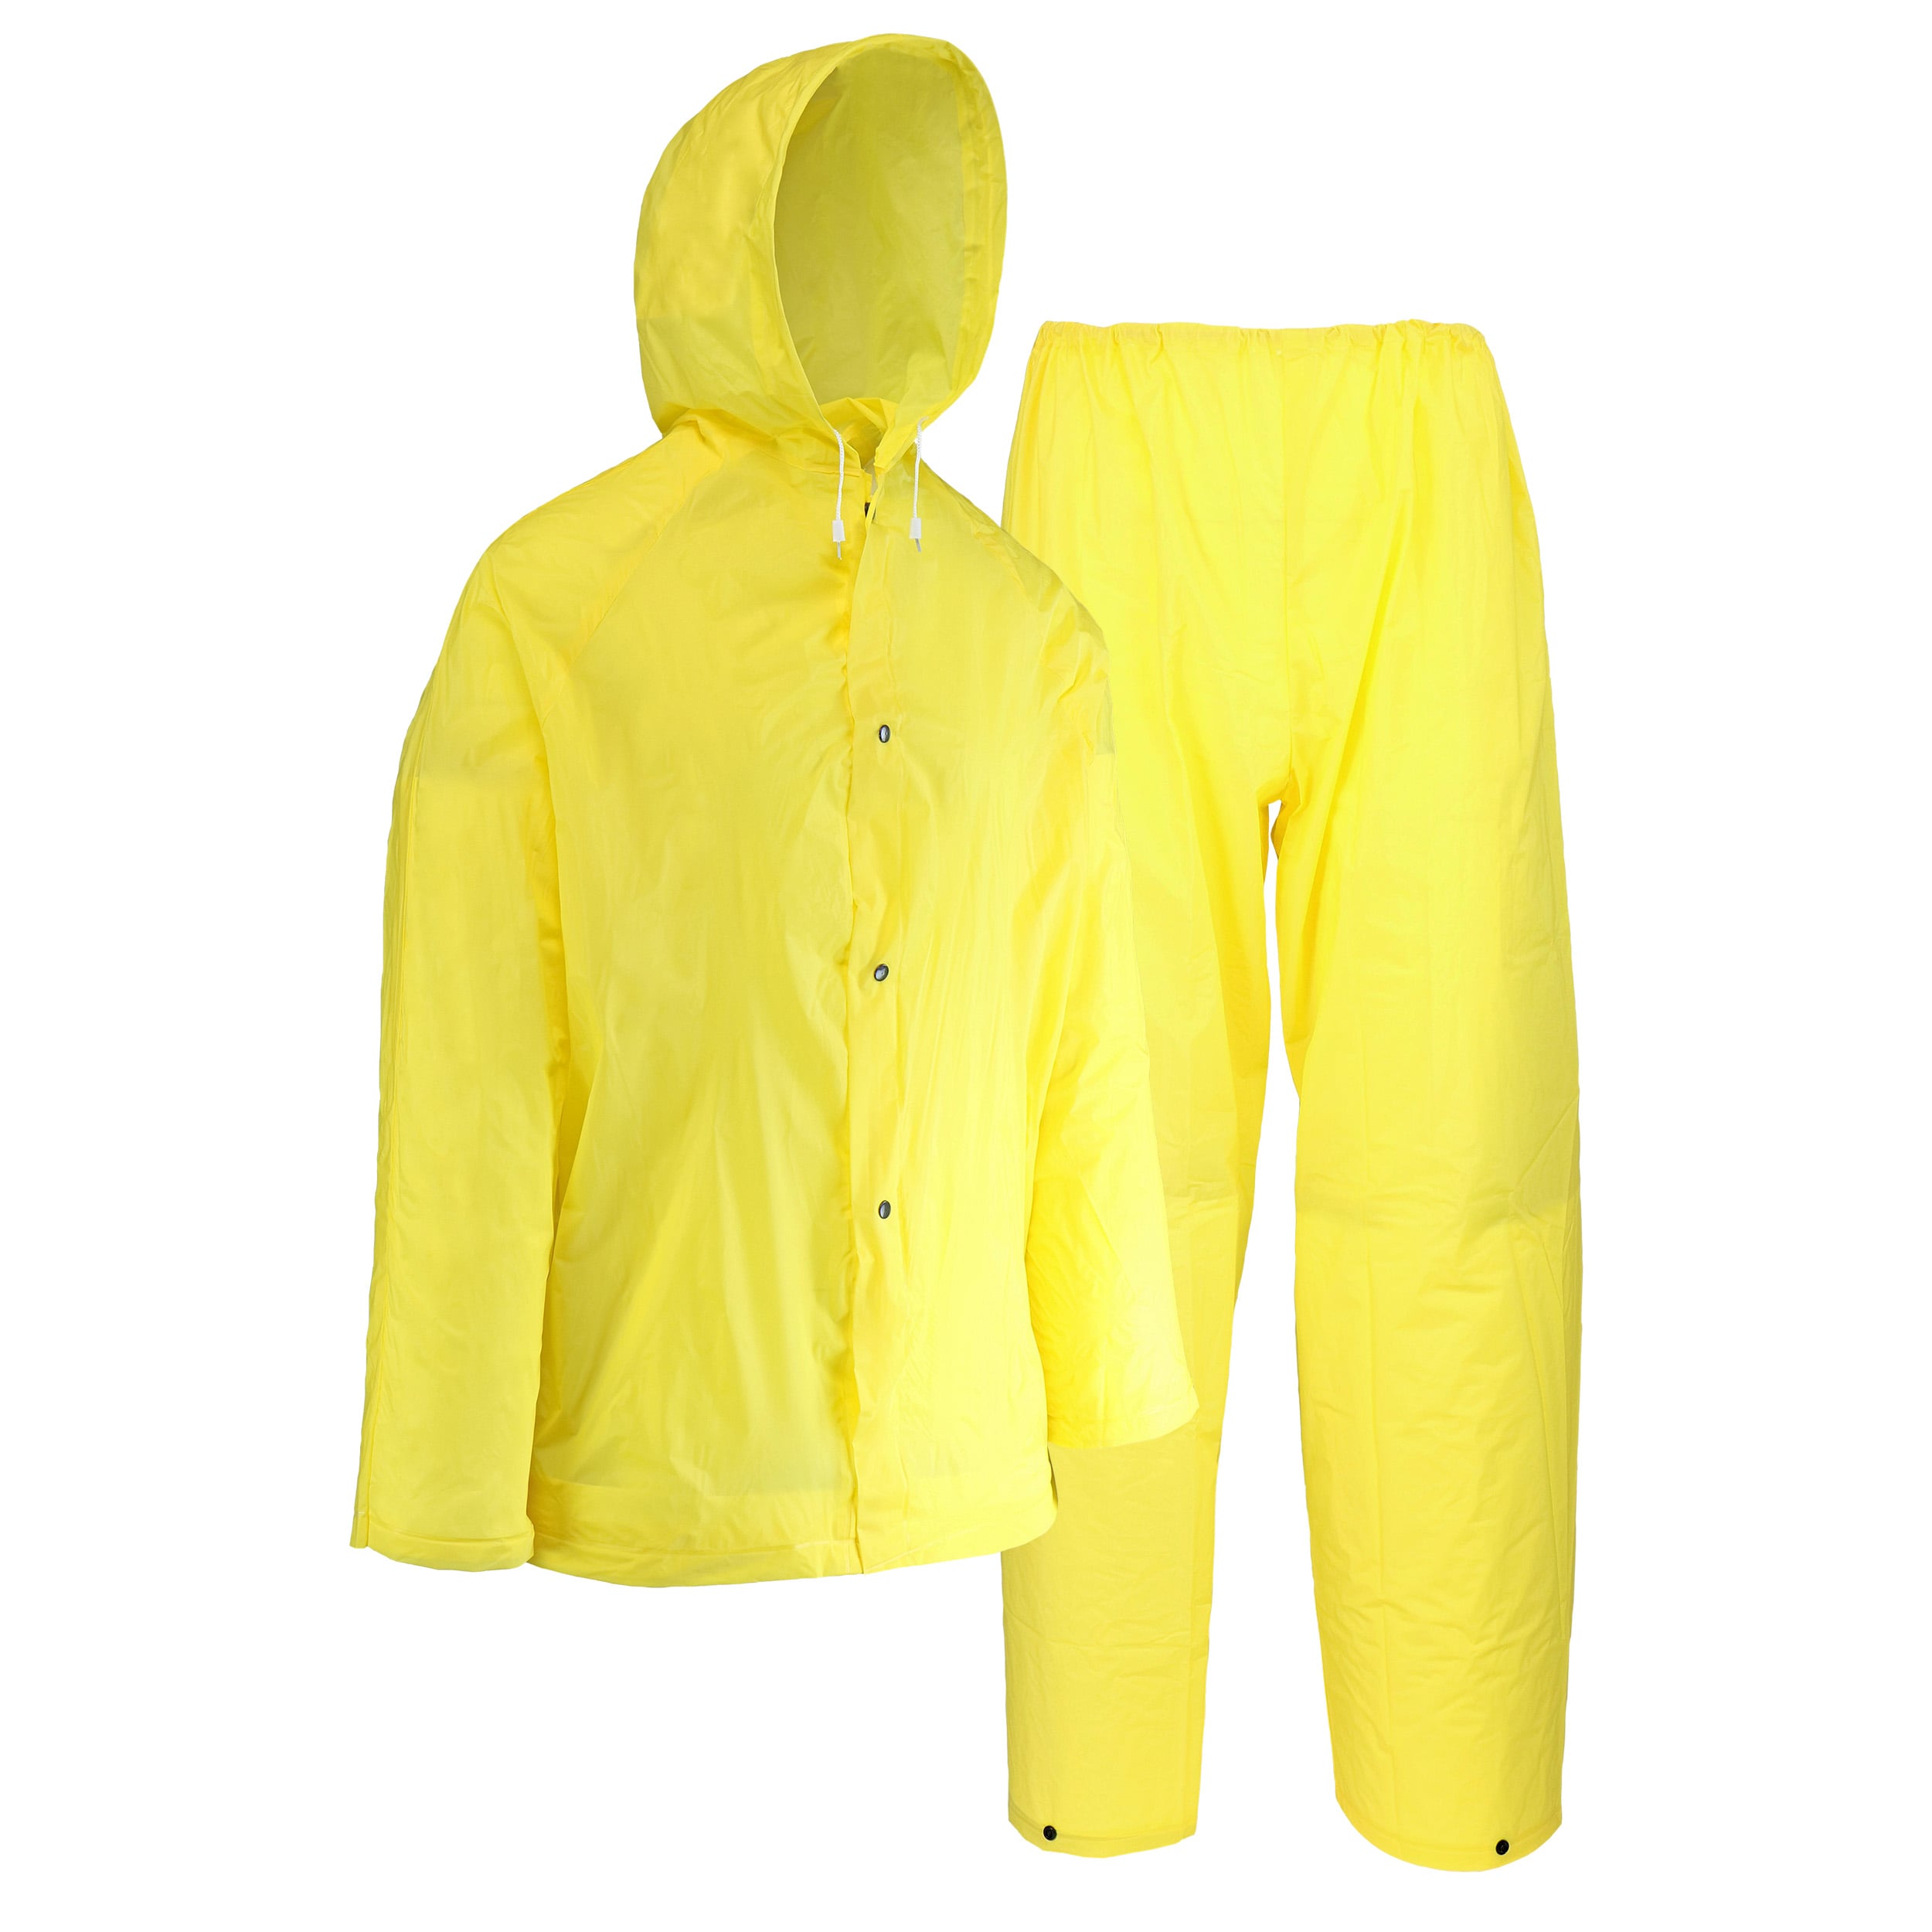 Safety Works 2-Piece Men's Rain Suit in the Gear department at Lowes.com